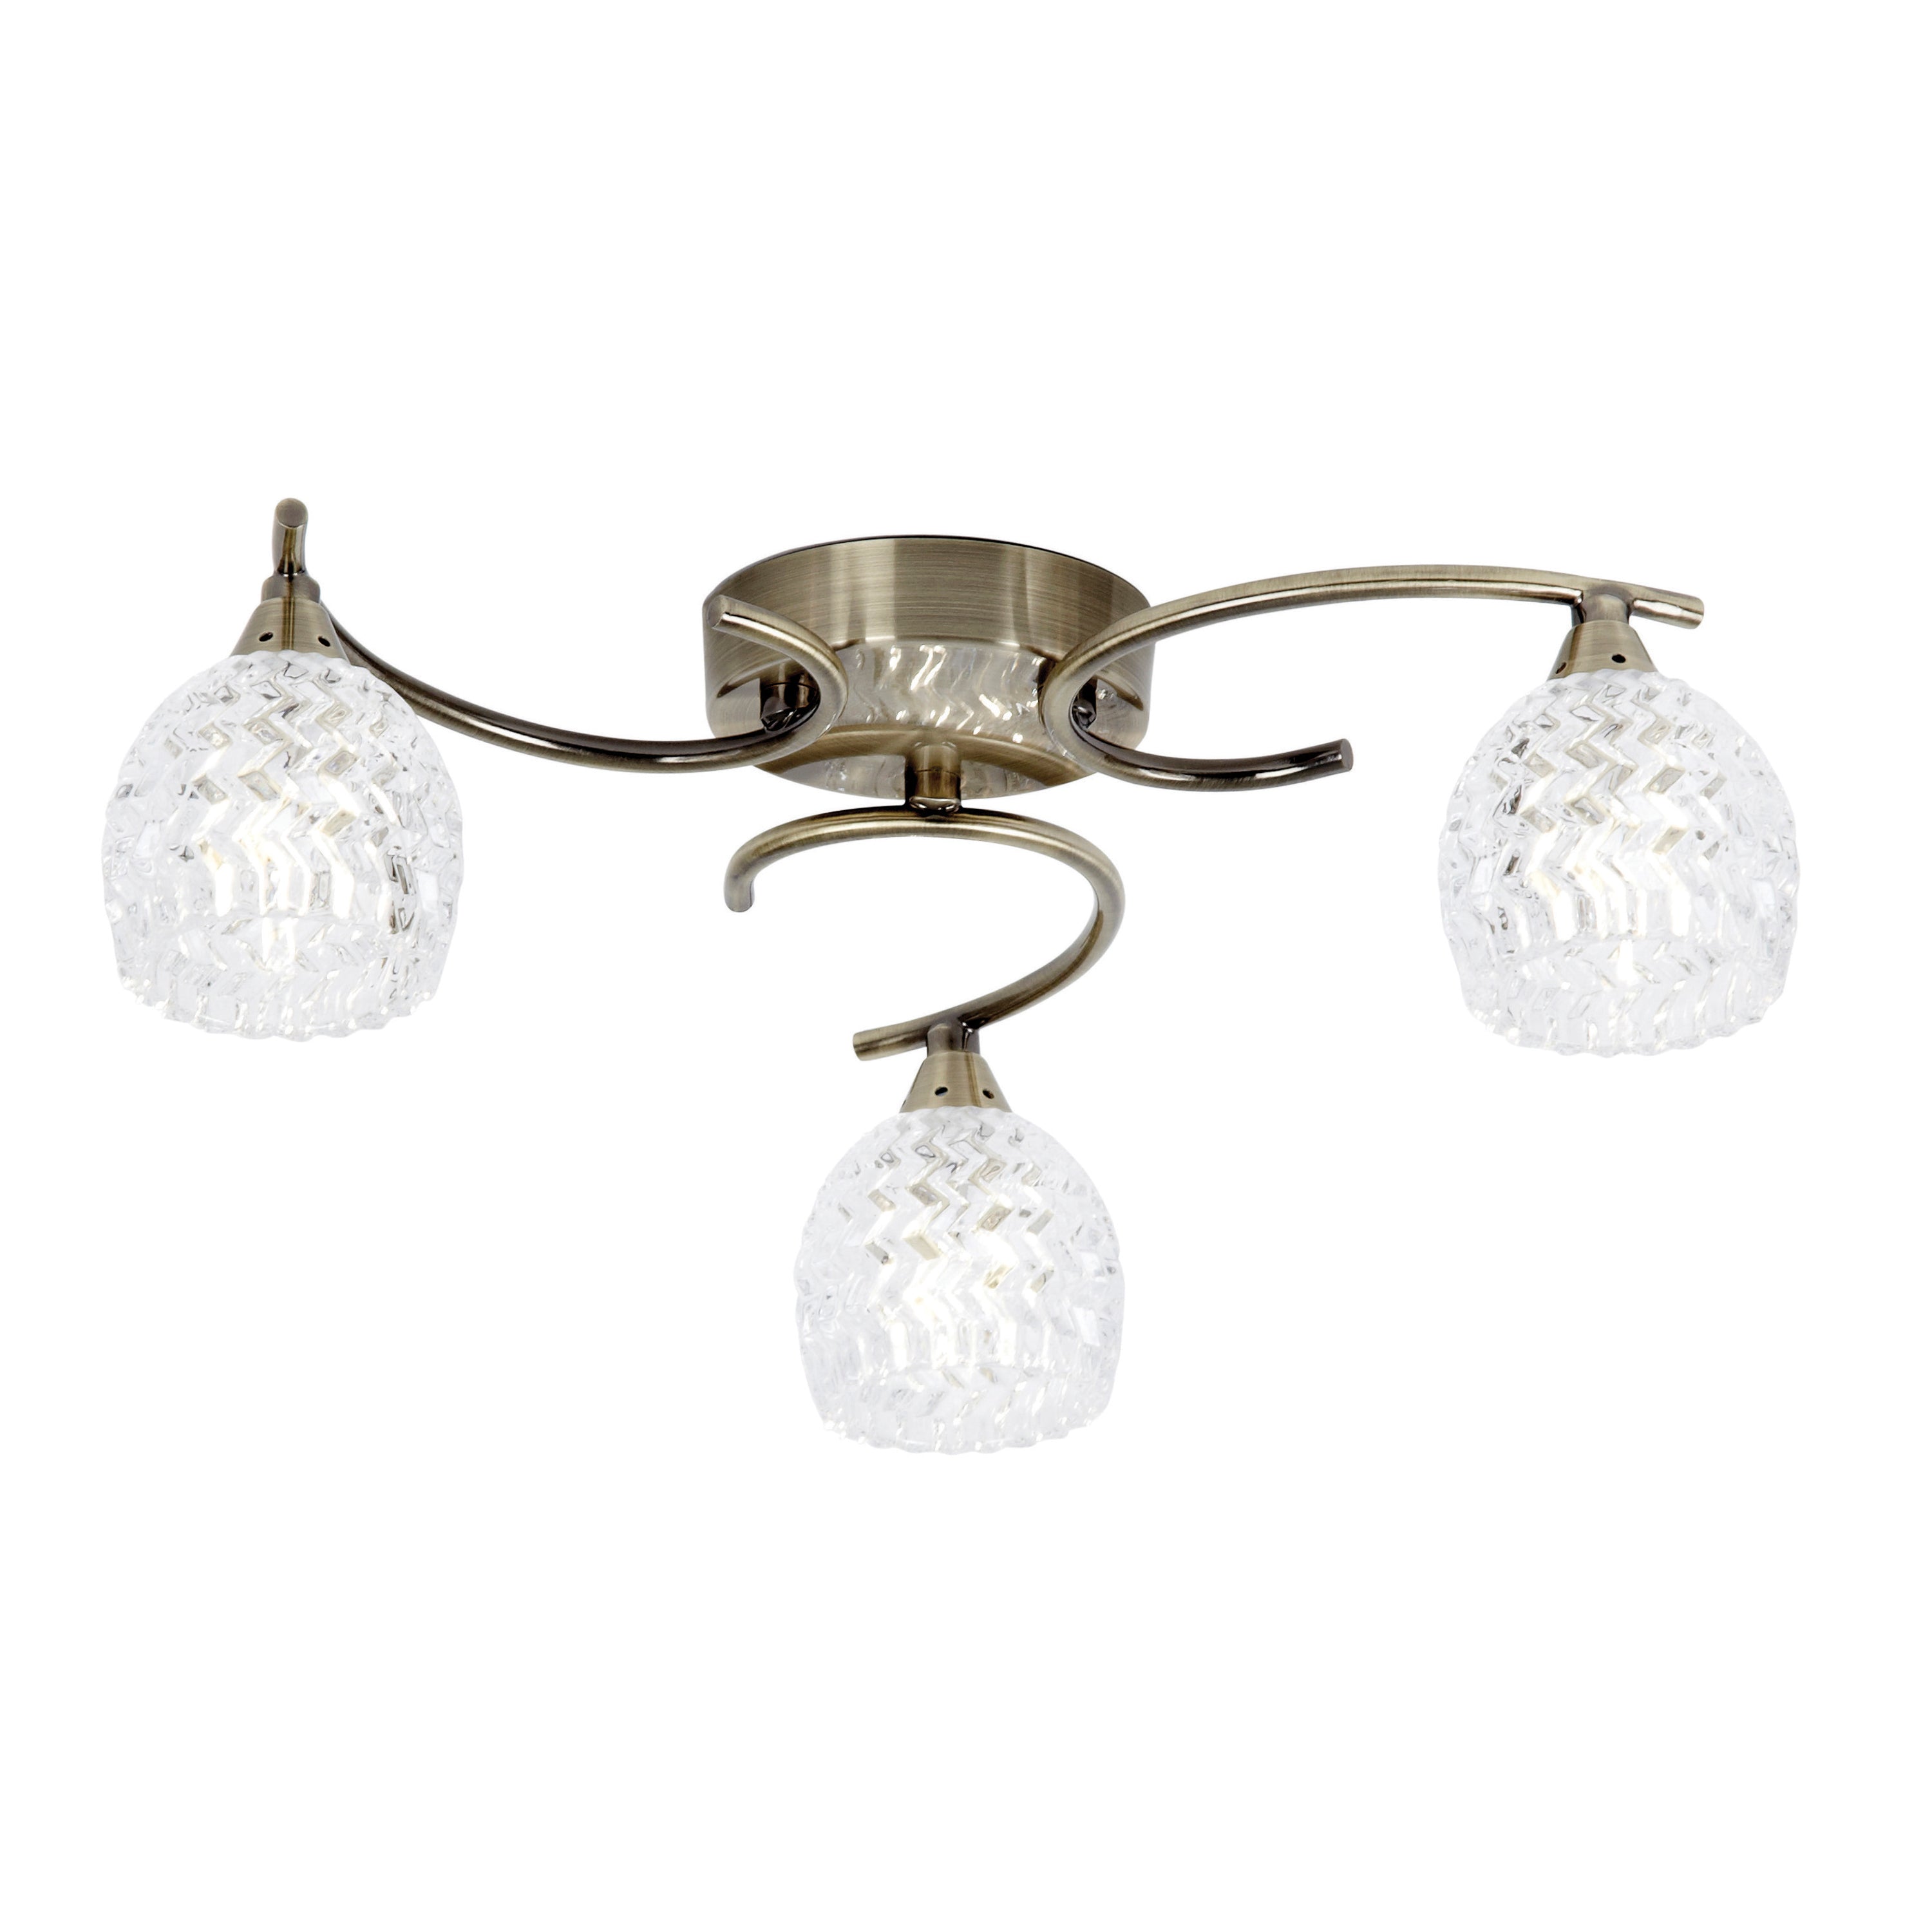 Bowyer 3 Ceiling Lamp Antique Brass